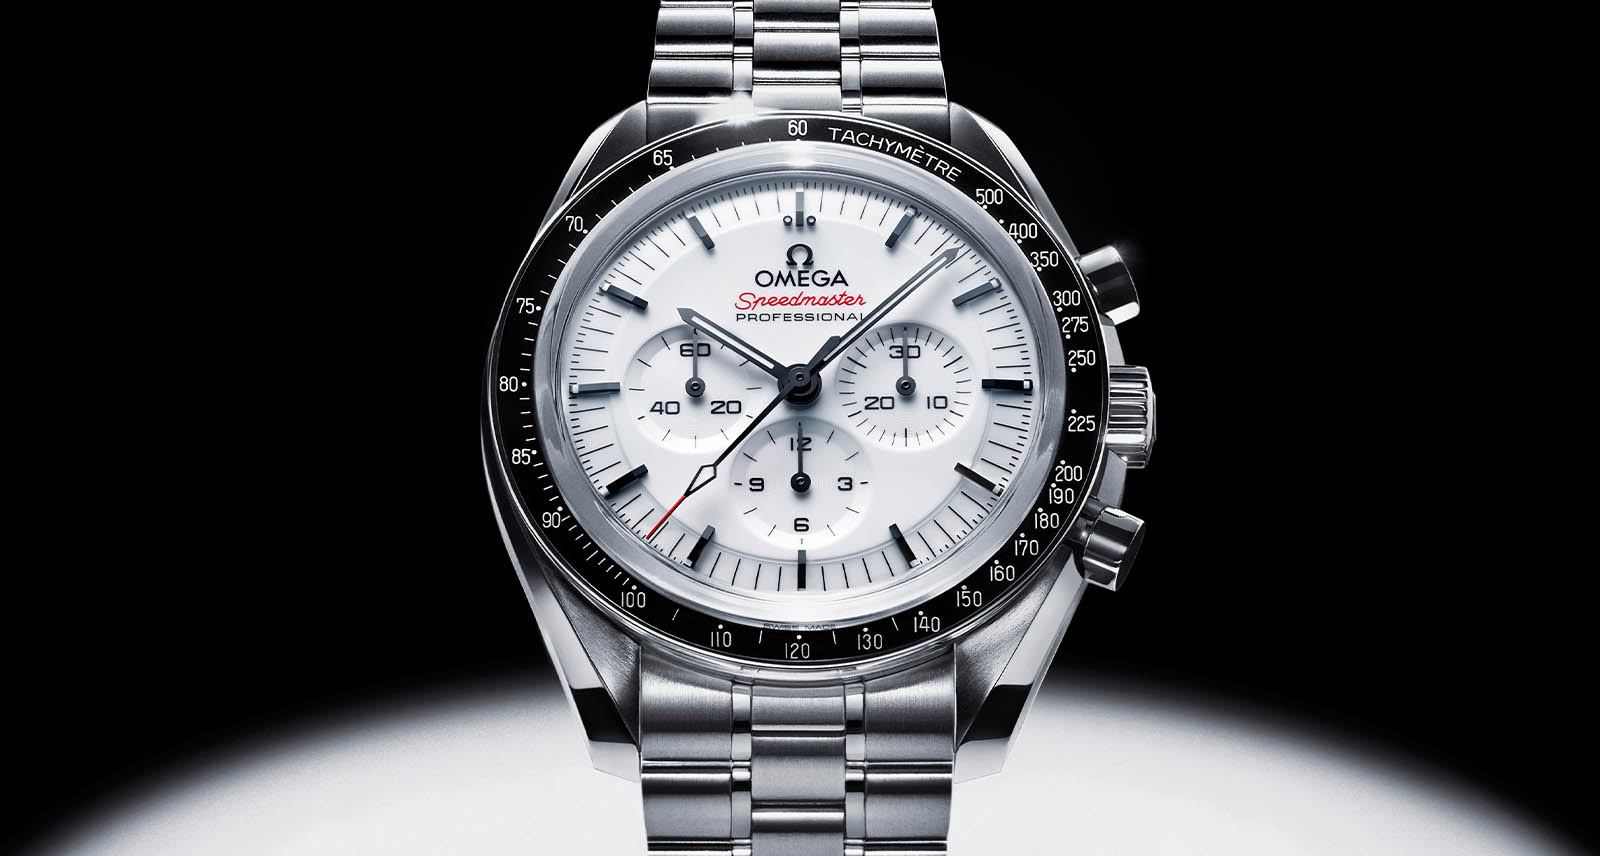 Speedmaster with a white lacquered dial